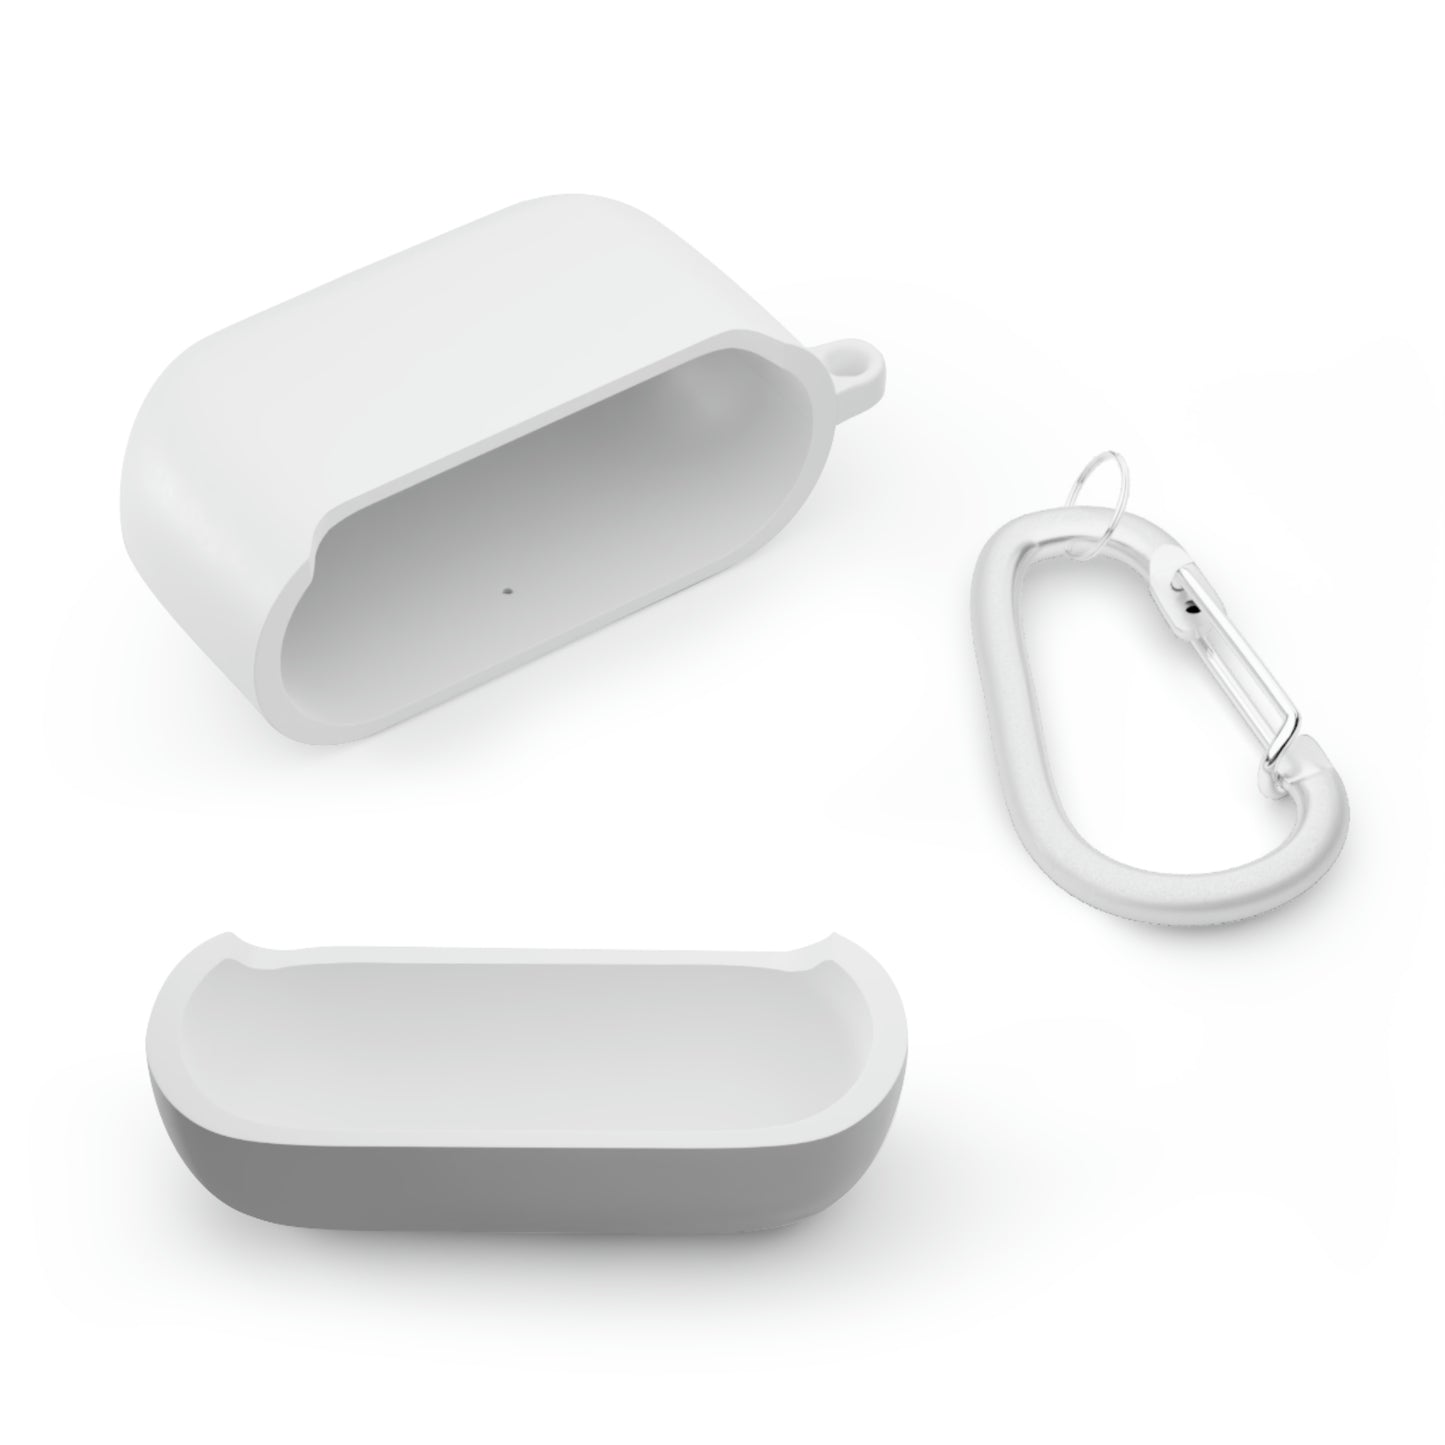 Euro Square and Compasses AirPods and AirPods Pro Case Cover